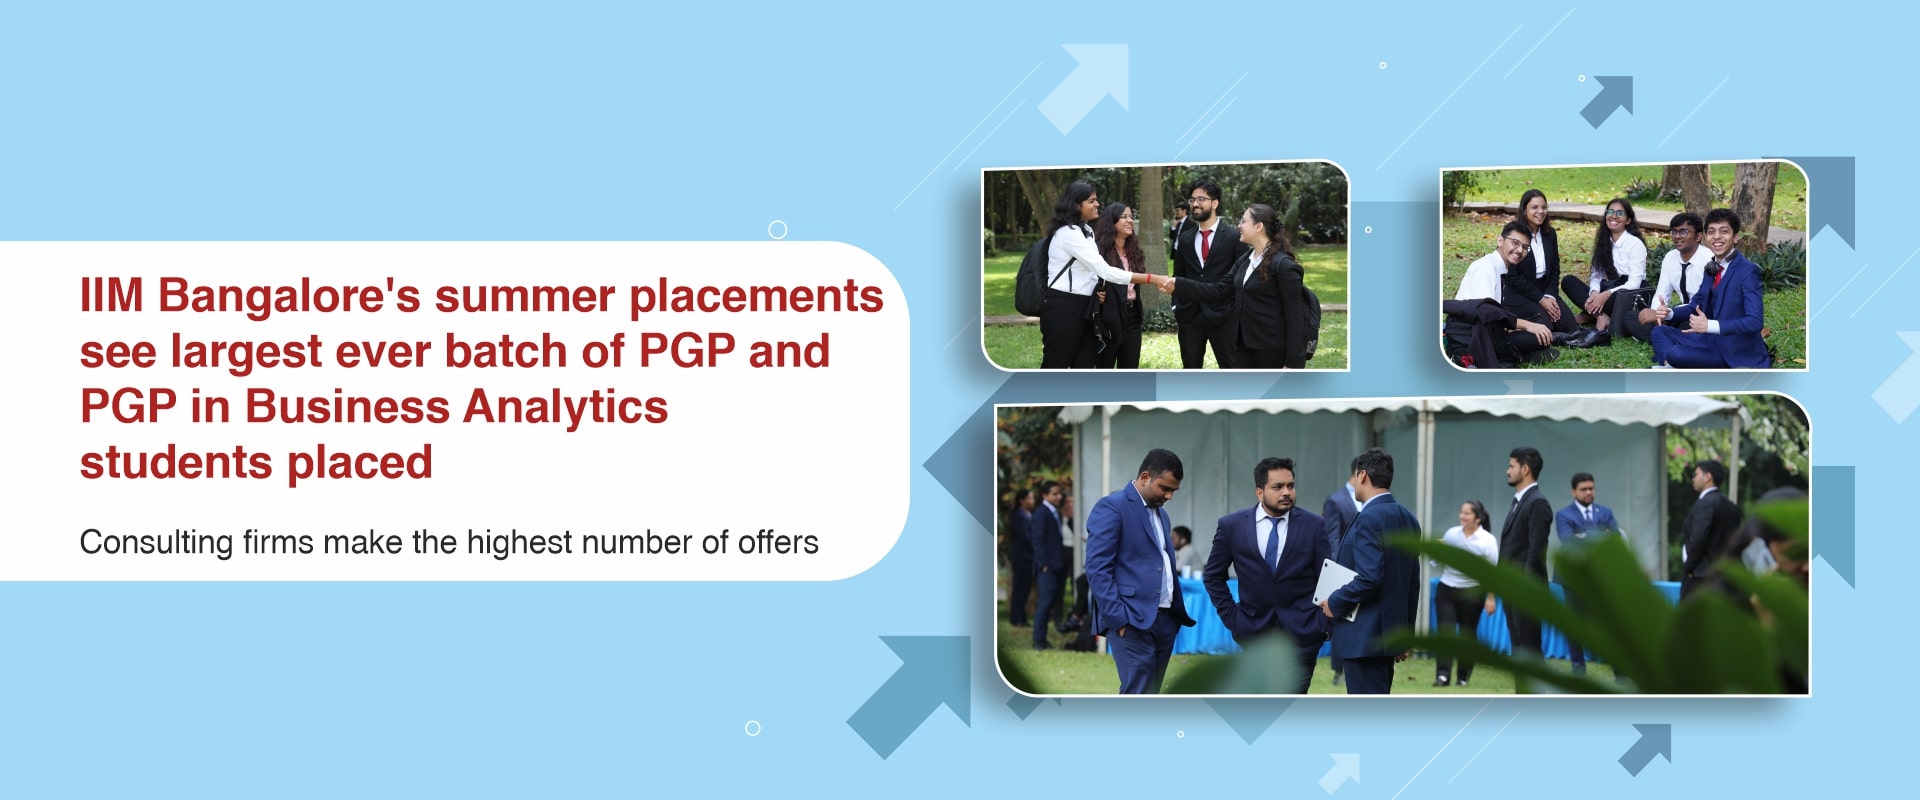 IIM Bangalore’s summer placements see largest ever batch of PGP and PGP in Business Analytics students placed